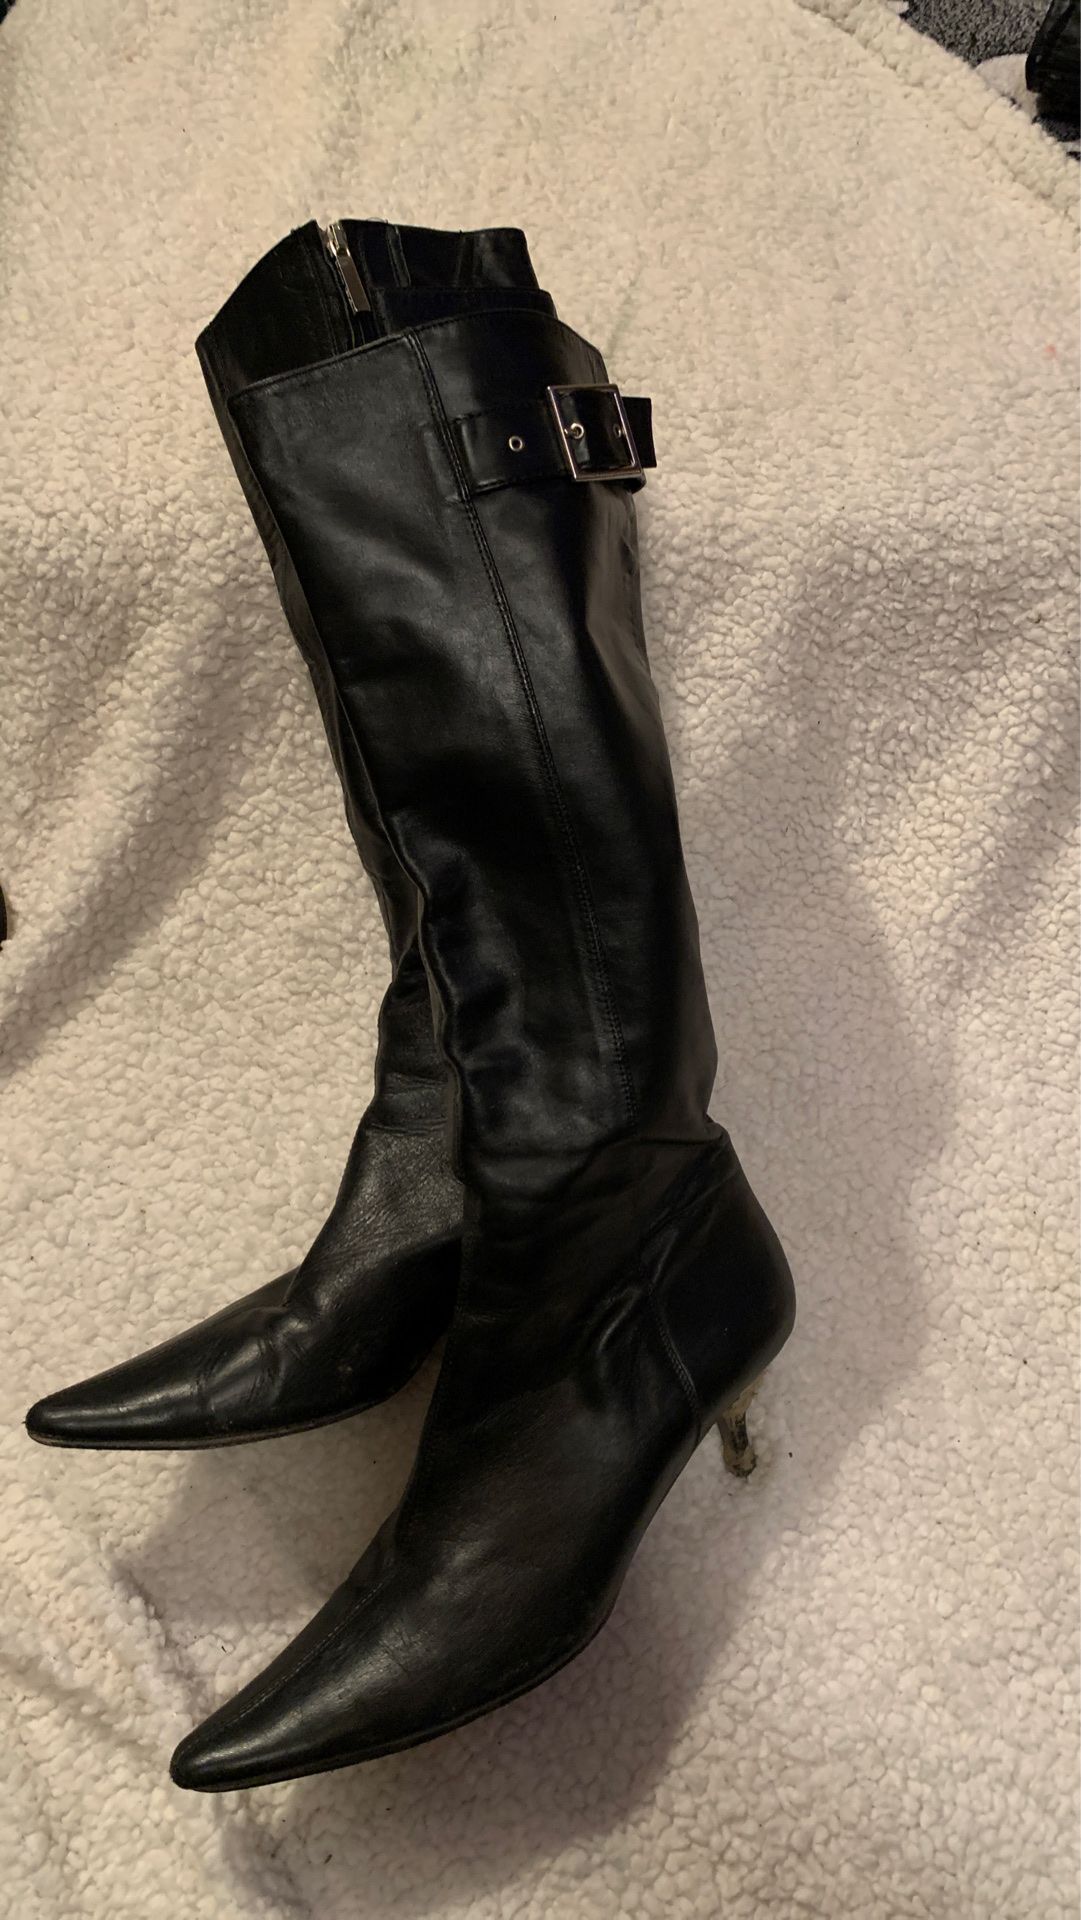 Banana Republic Tall Leather Black Boots Size 7.5 Made in Italy